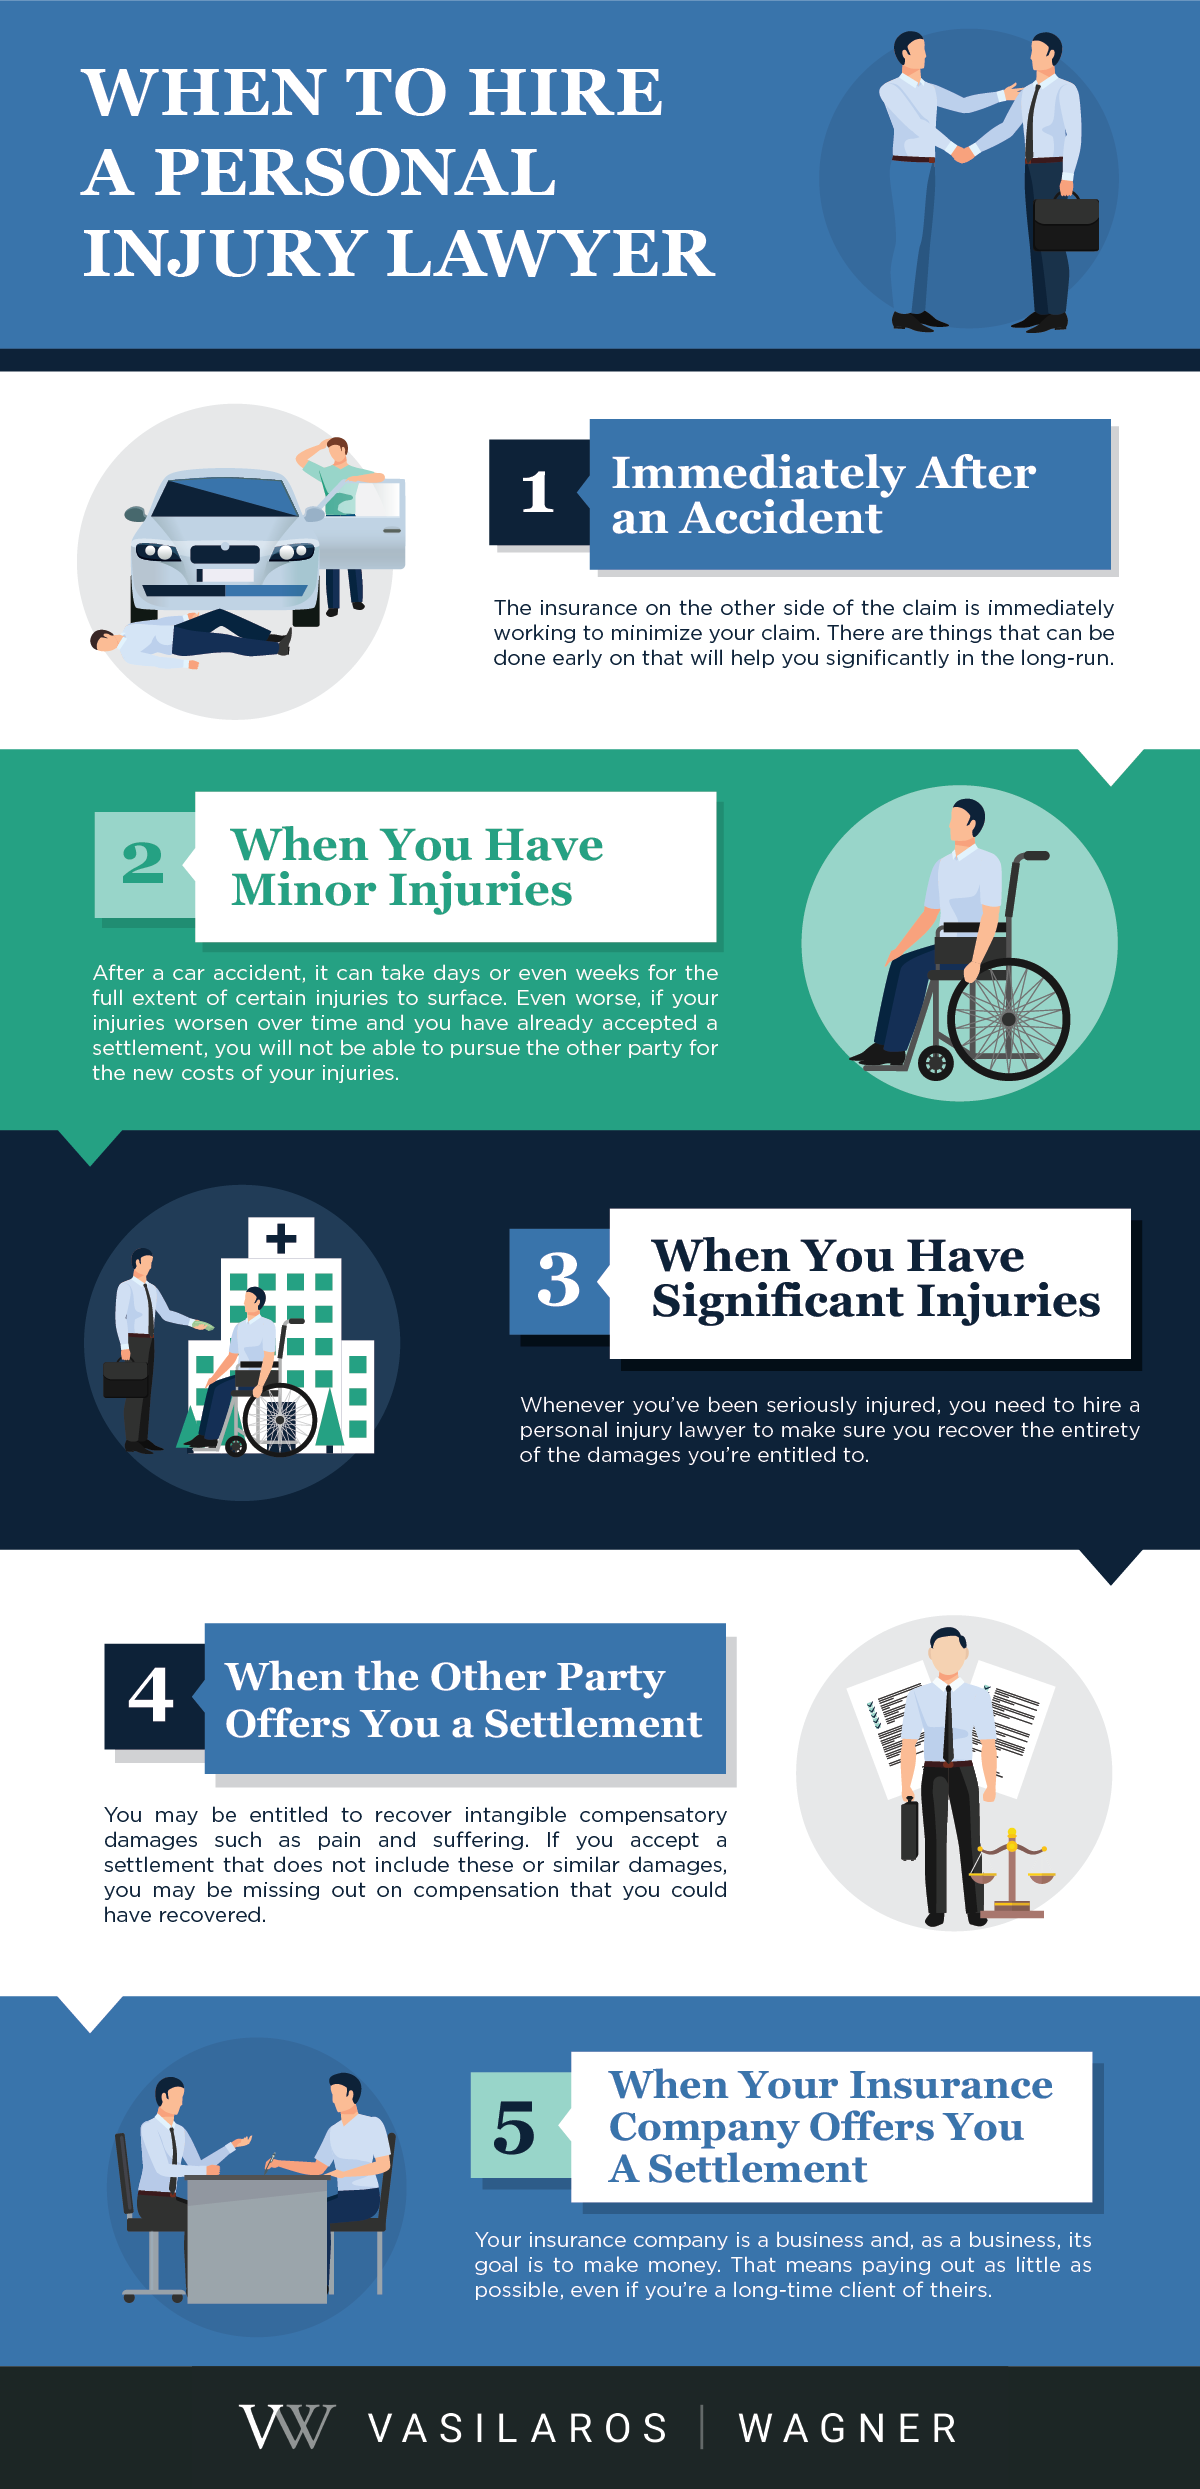 5 Ways Hiring A Personal Injury Lawyer Will Help Your Claim 43038 - 5 Ways Hiring A Personal Injury Lawyer Will Help Your Claim